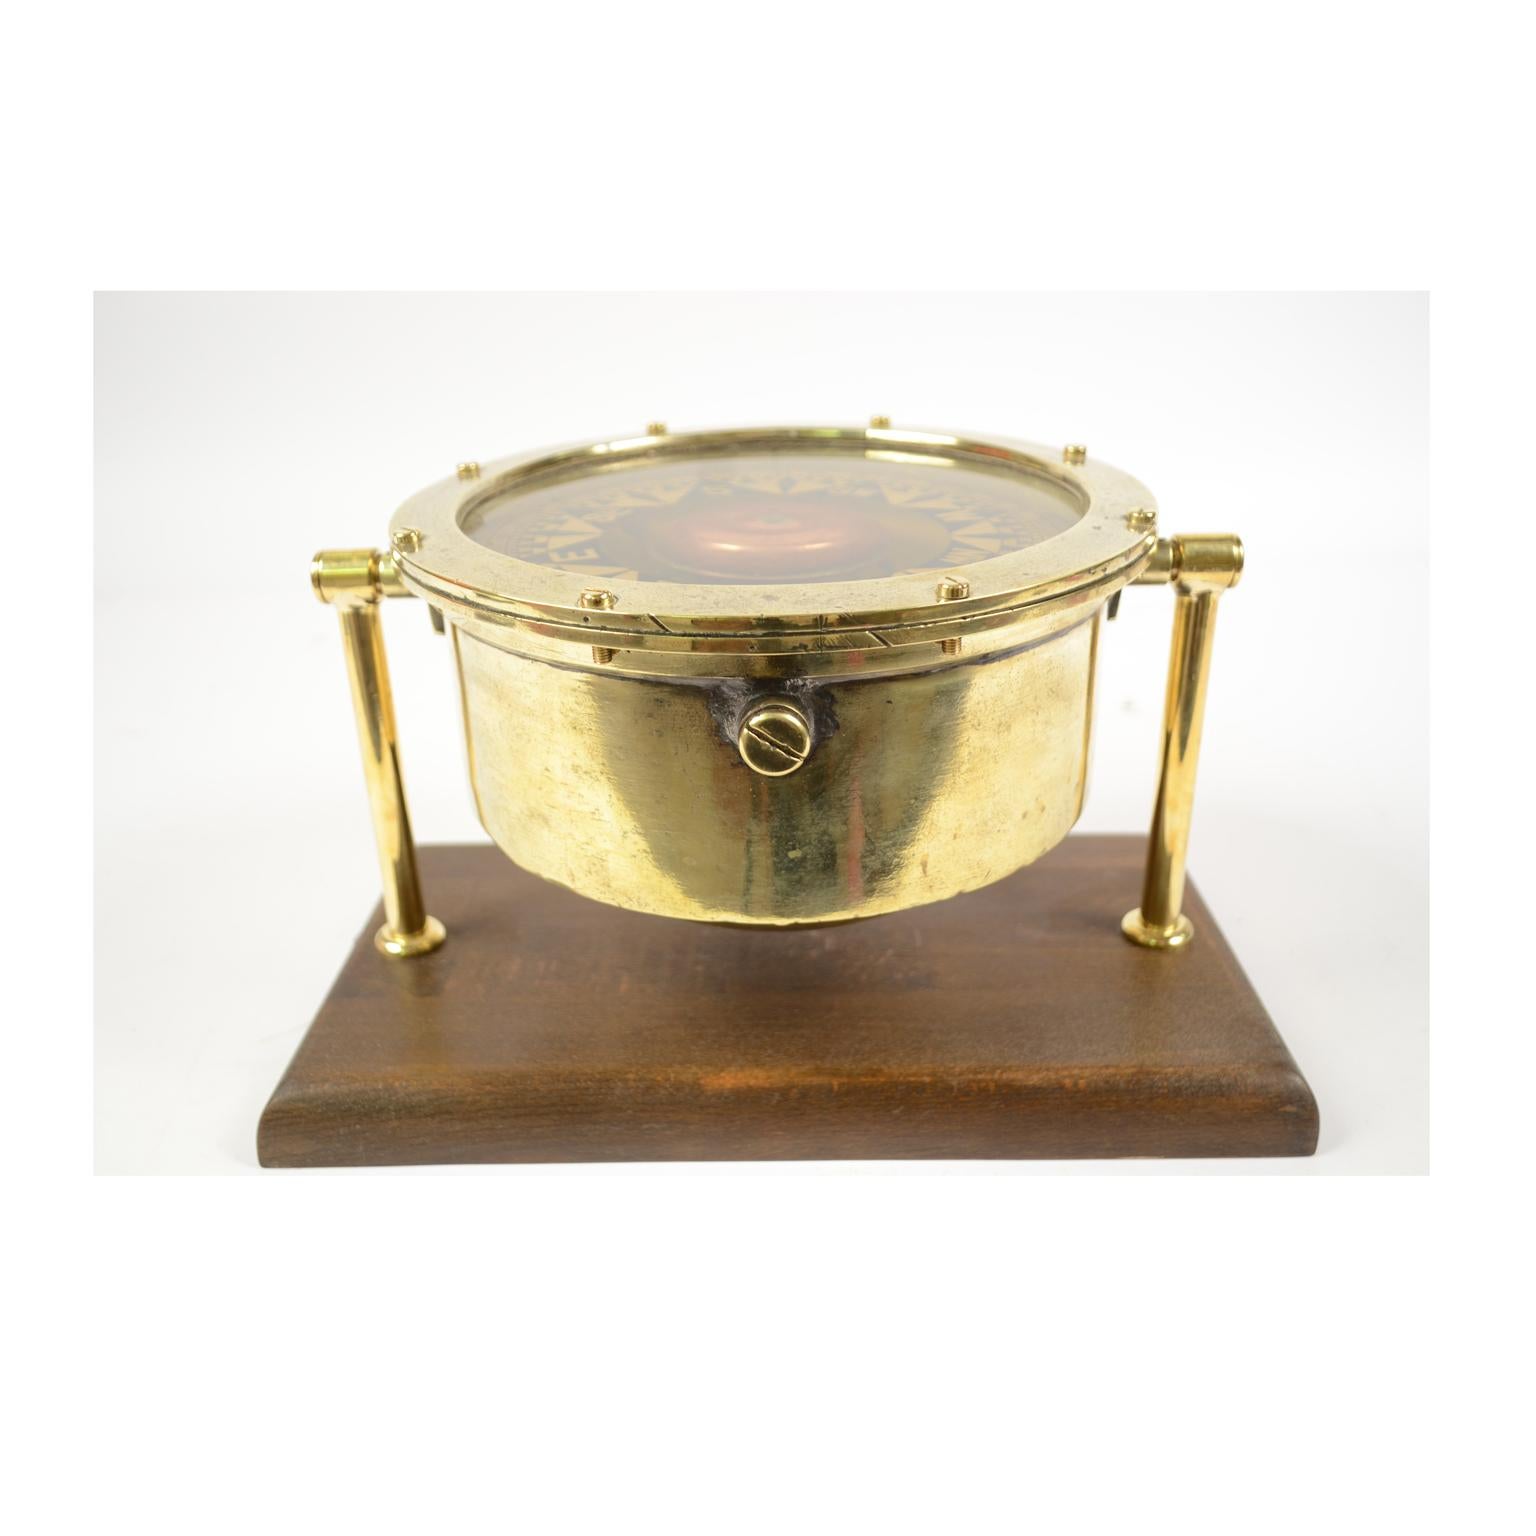 Large nautical liquid compass, brass, on universal joint, British manufacture of the second half of the 19th century mounted on wooden board. The compass has a cylindrical brass container, on the bottom of which a stem of hard metal is fixed, on